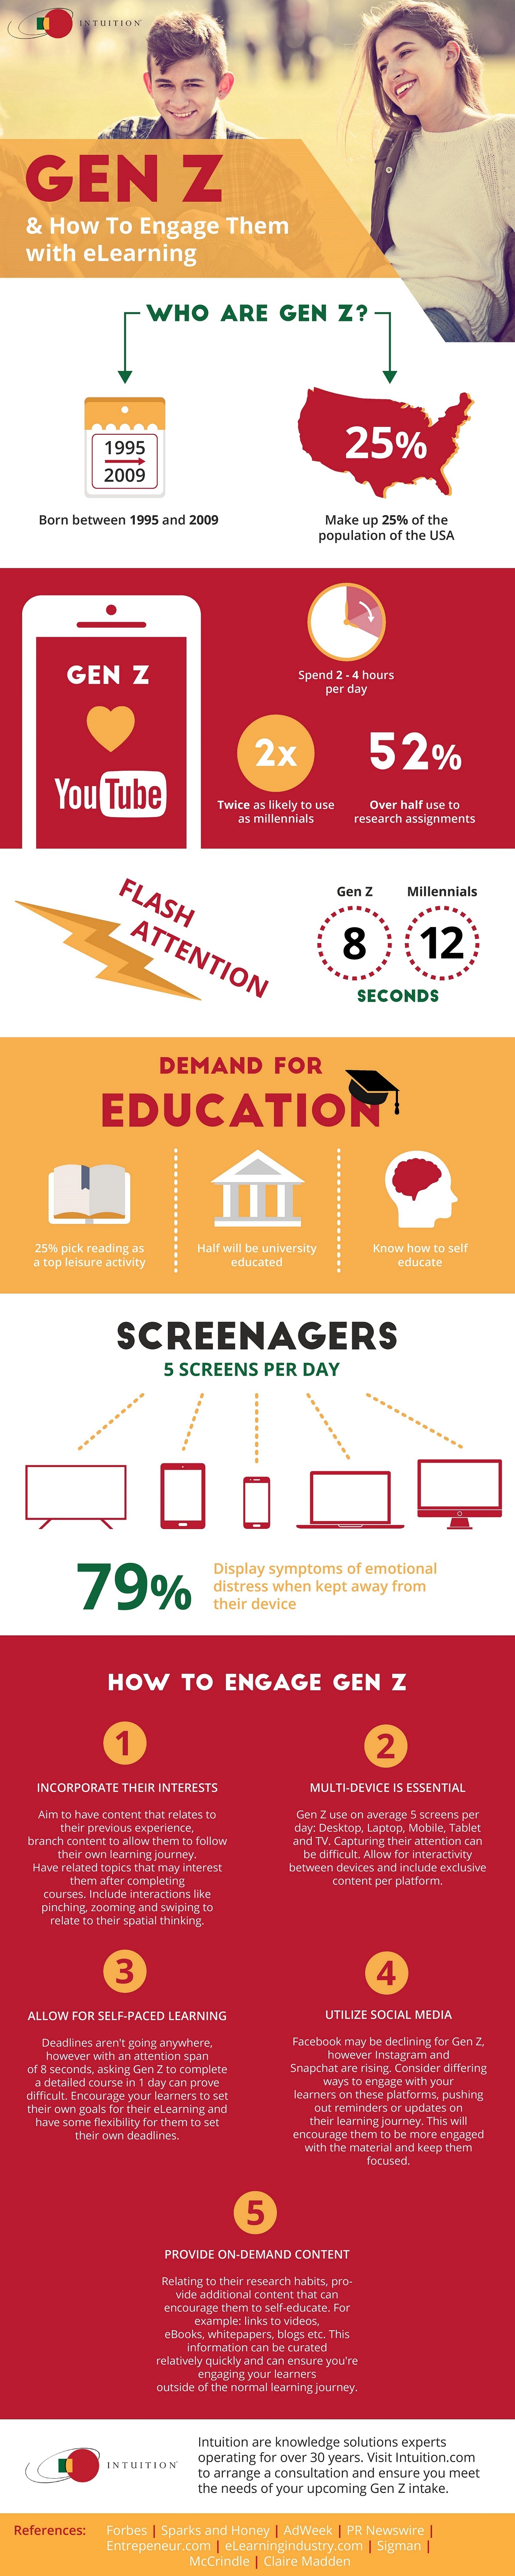 Gen Z and How to Engage Them with eLearning Infographic